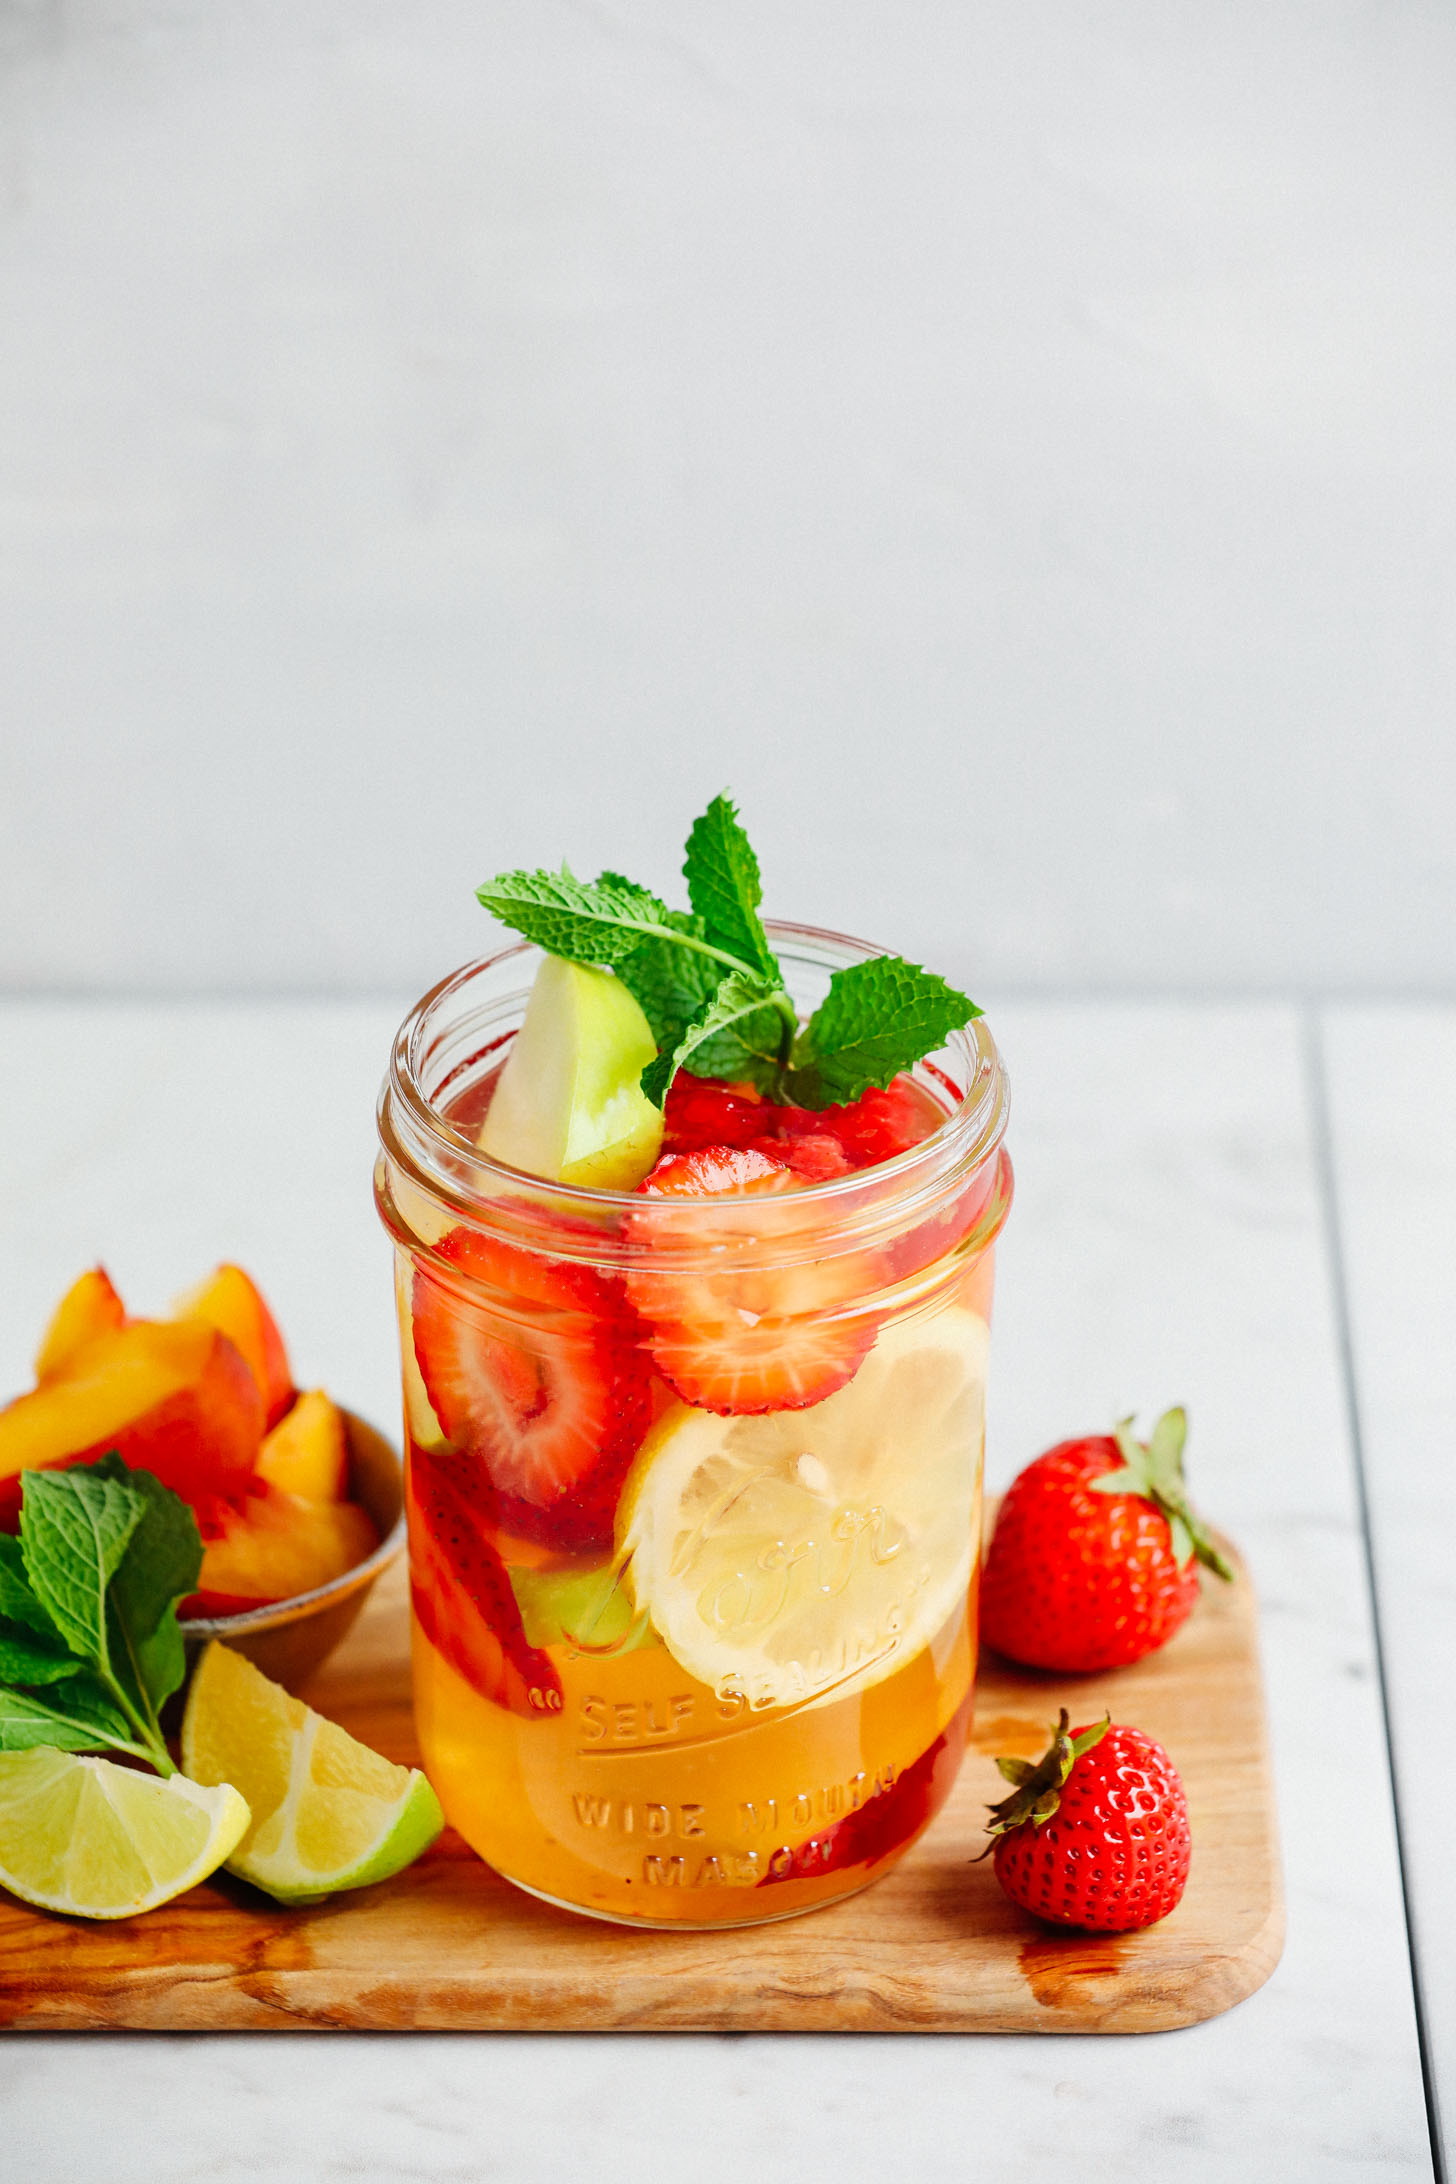 Traditional White Sangria Minimalist Baker Recipes,Types Of Eagles In Minnesota